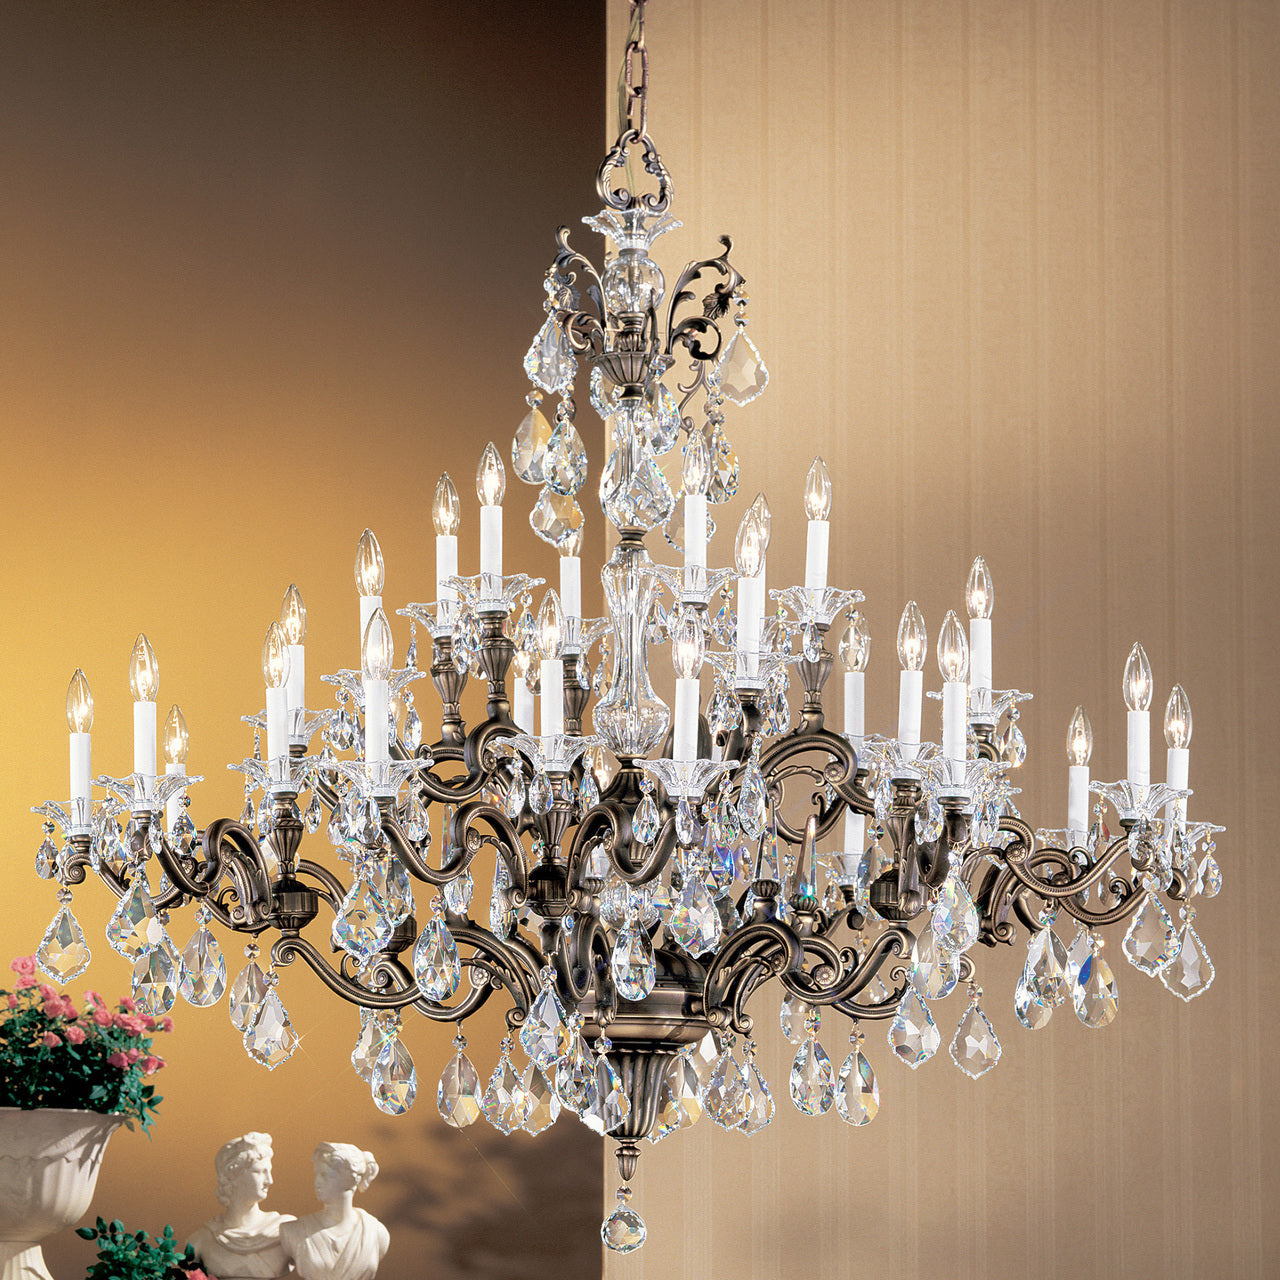 Classic Lighting 57130 RB CGT Via Firenze Crystal Chandelier in Roman Bronze (Imported from Spain)